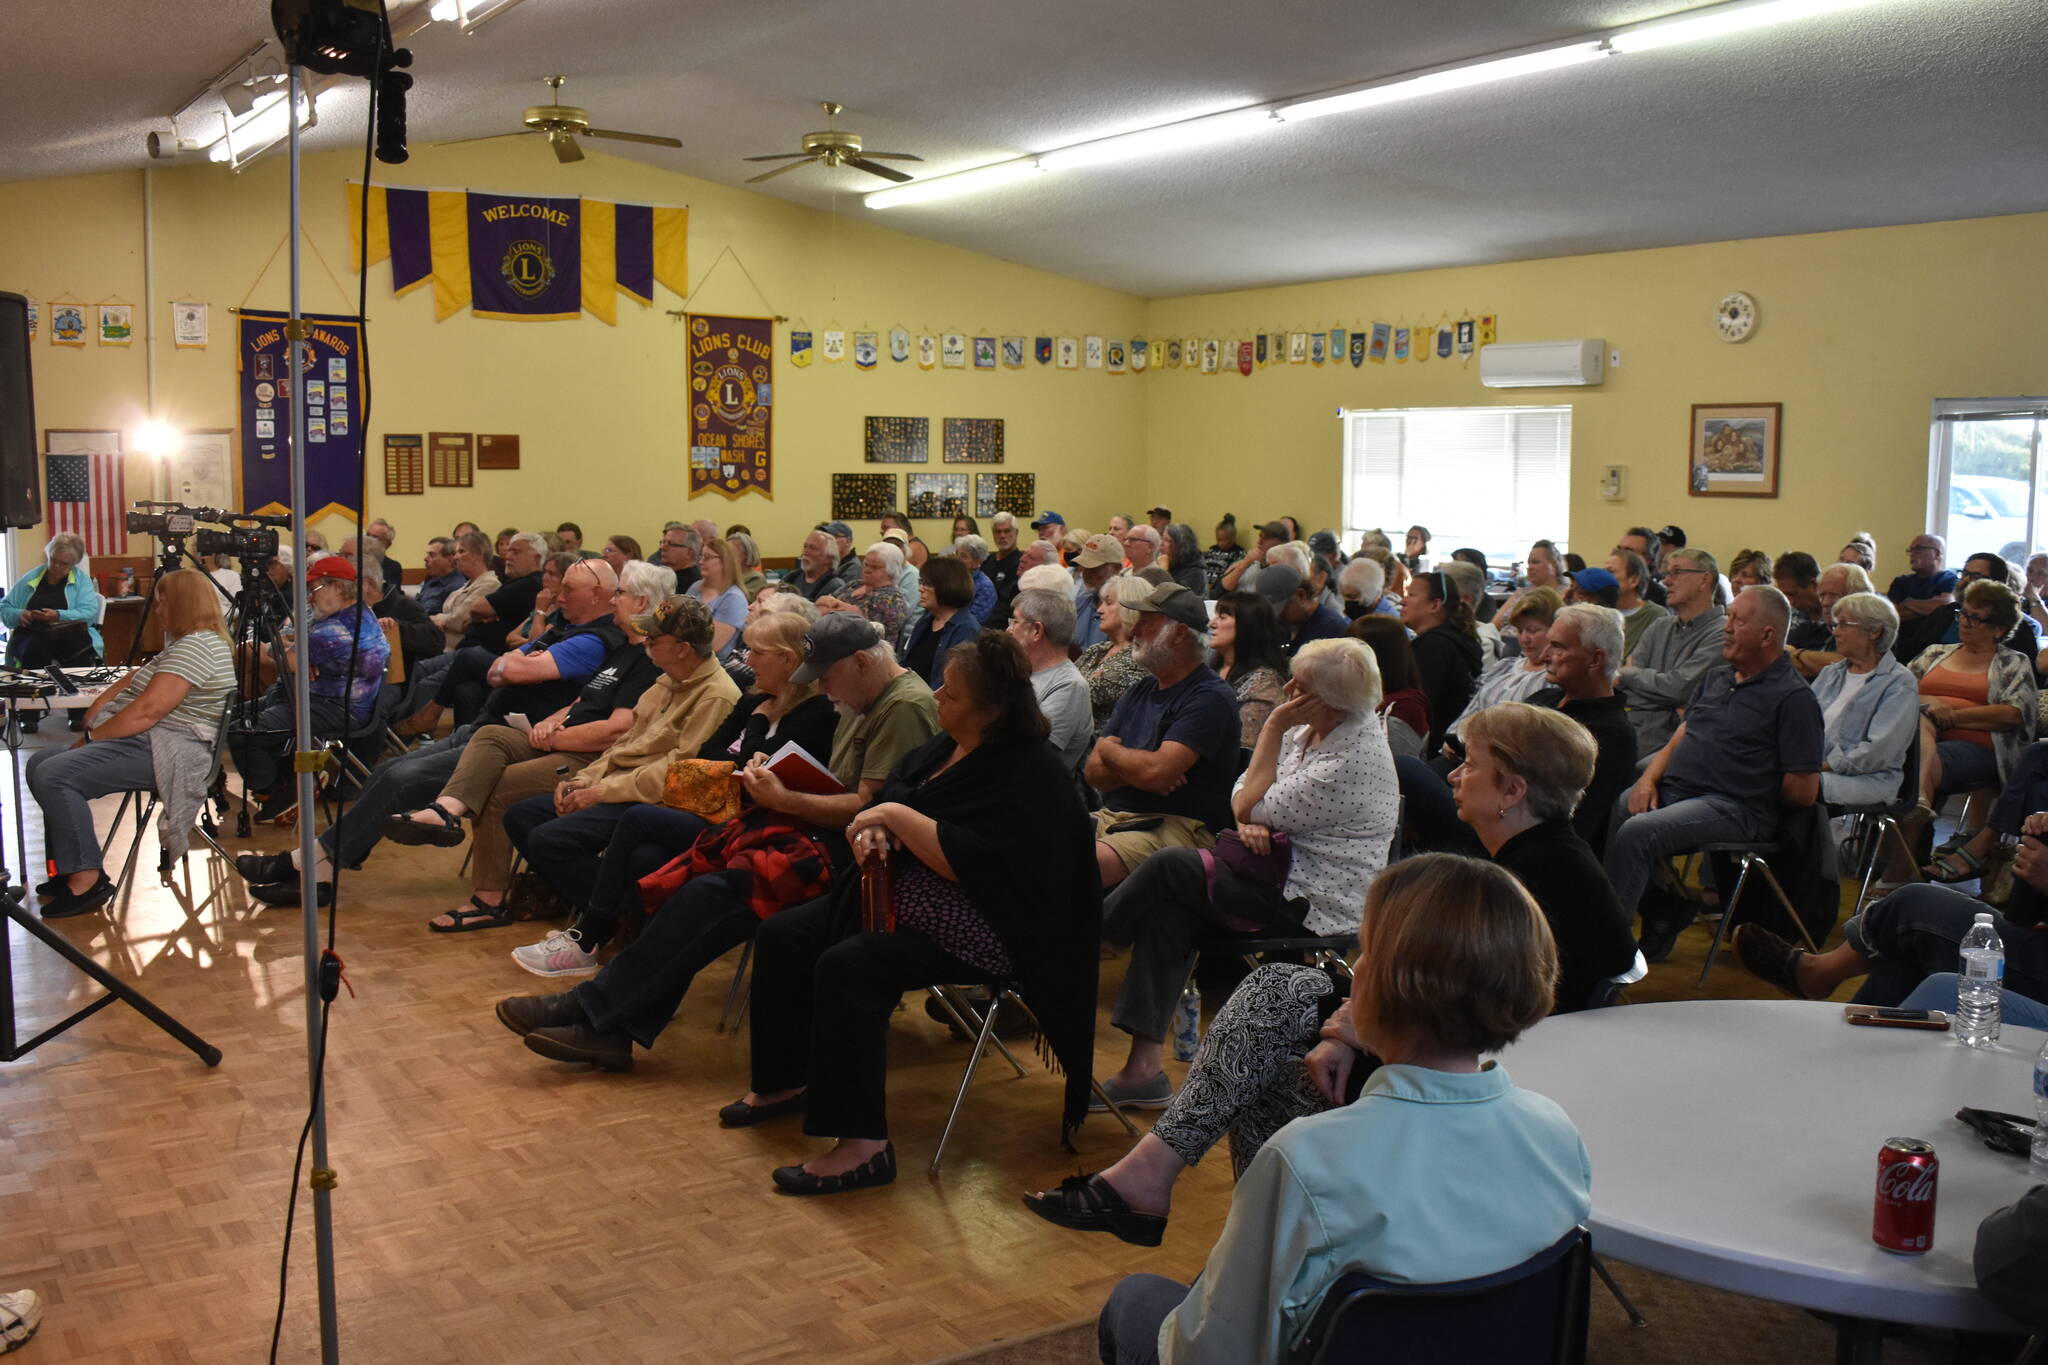 About 200 people attended a mayoral candidates forum at the Ocean Shores Lions Club on Wednesday, Sept. 6, according to Jane Shattuck, an organizer with Voice of the Shores, a citizens’ advocacy group that hosted the event. (Clayton Franke / The Daily World)